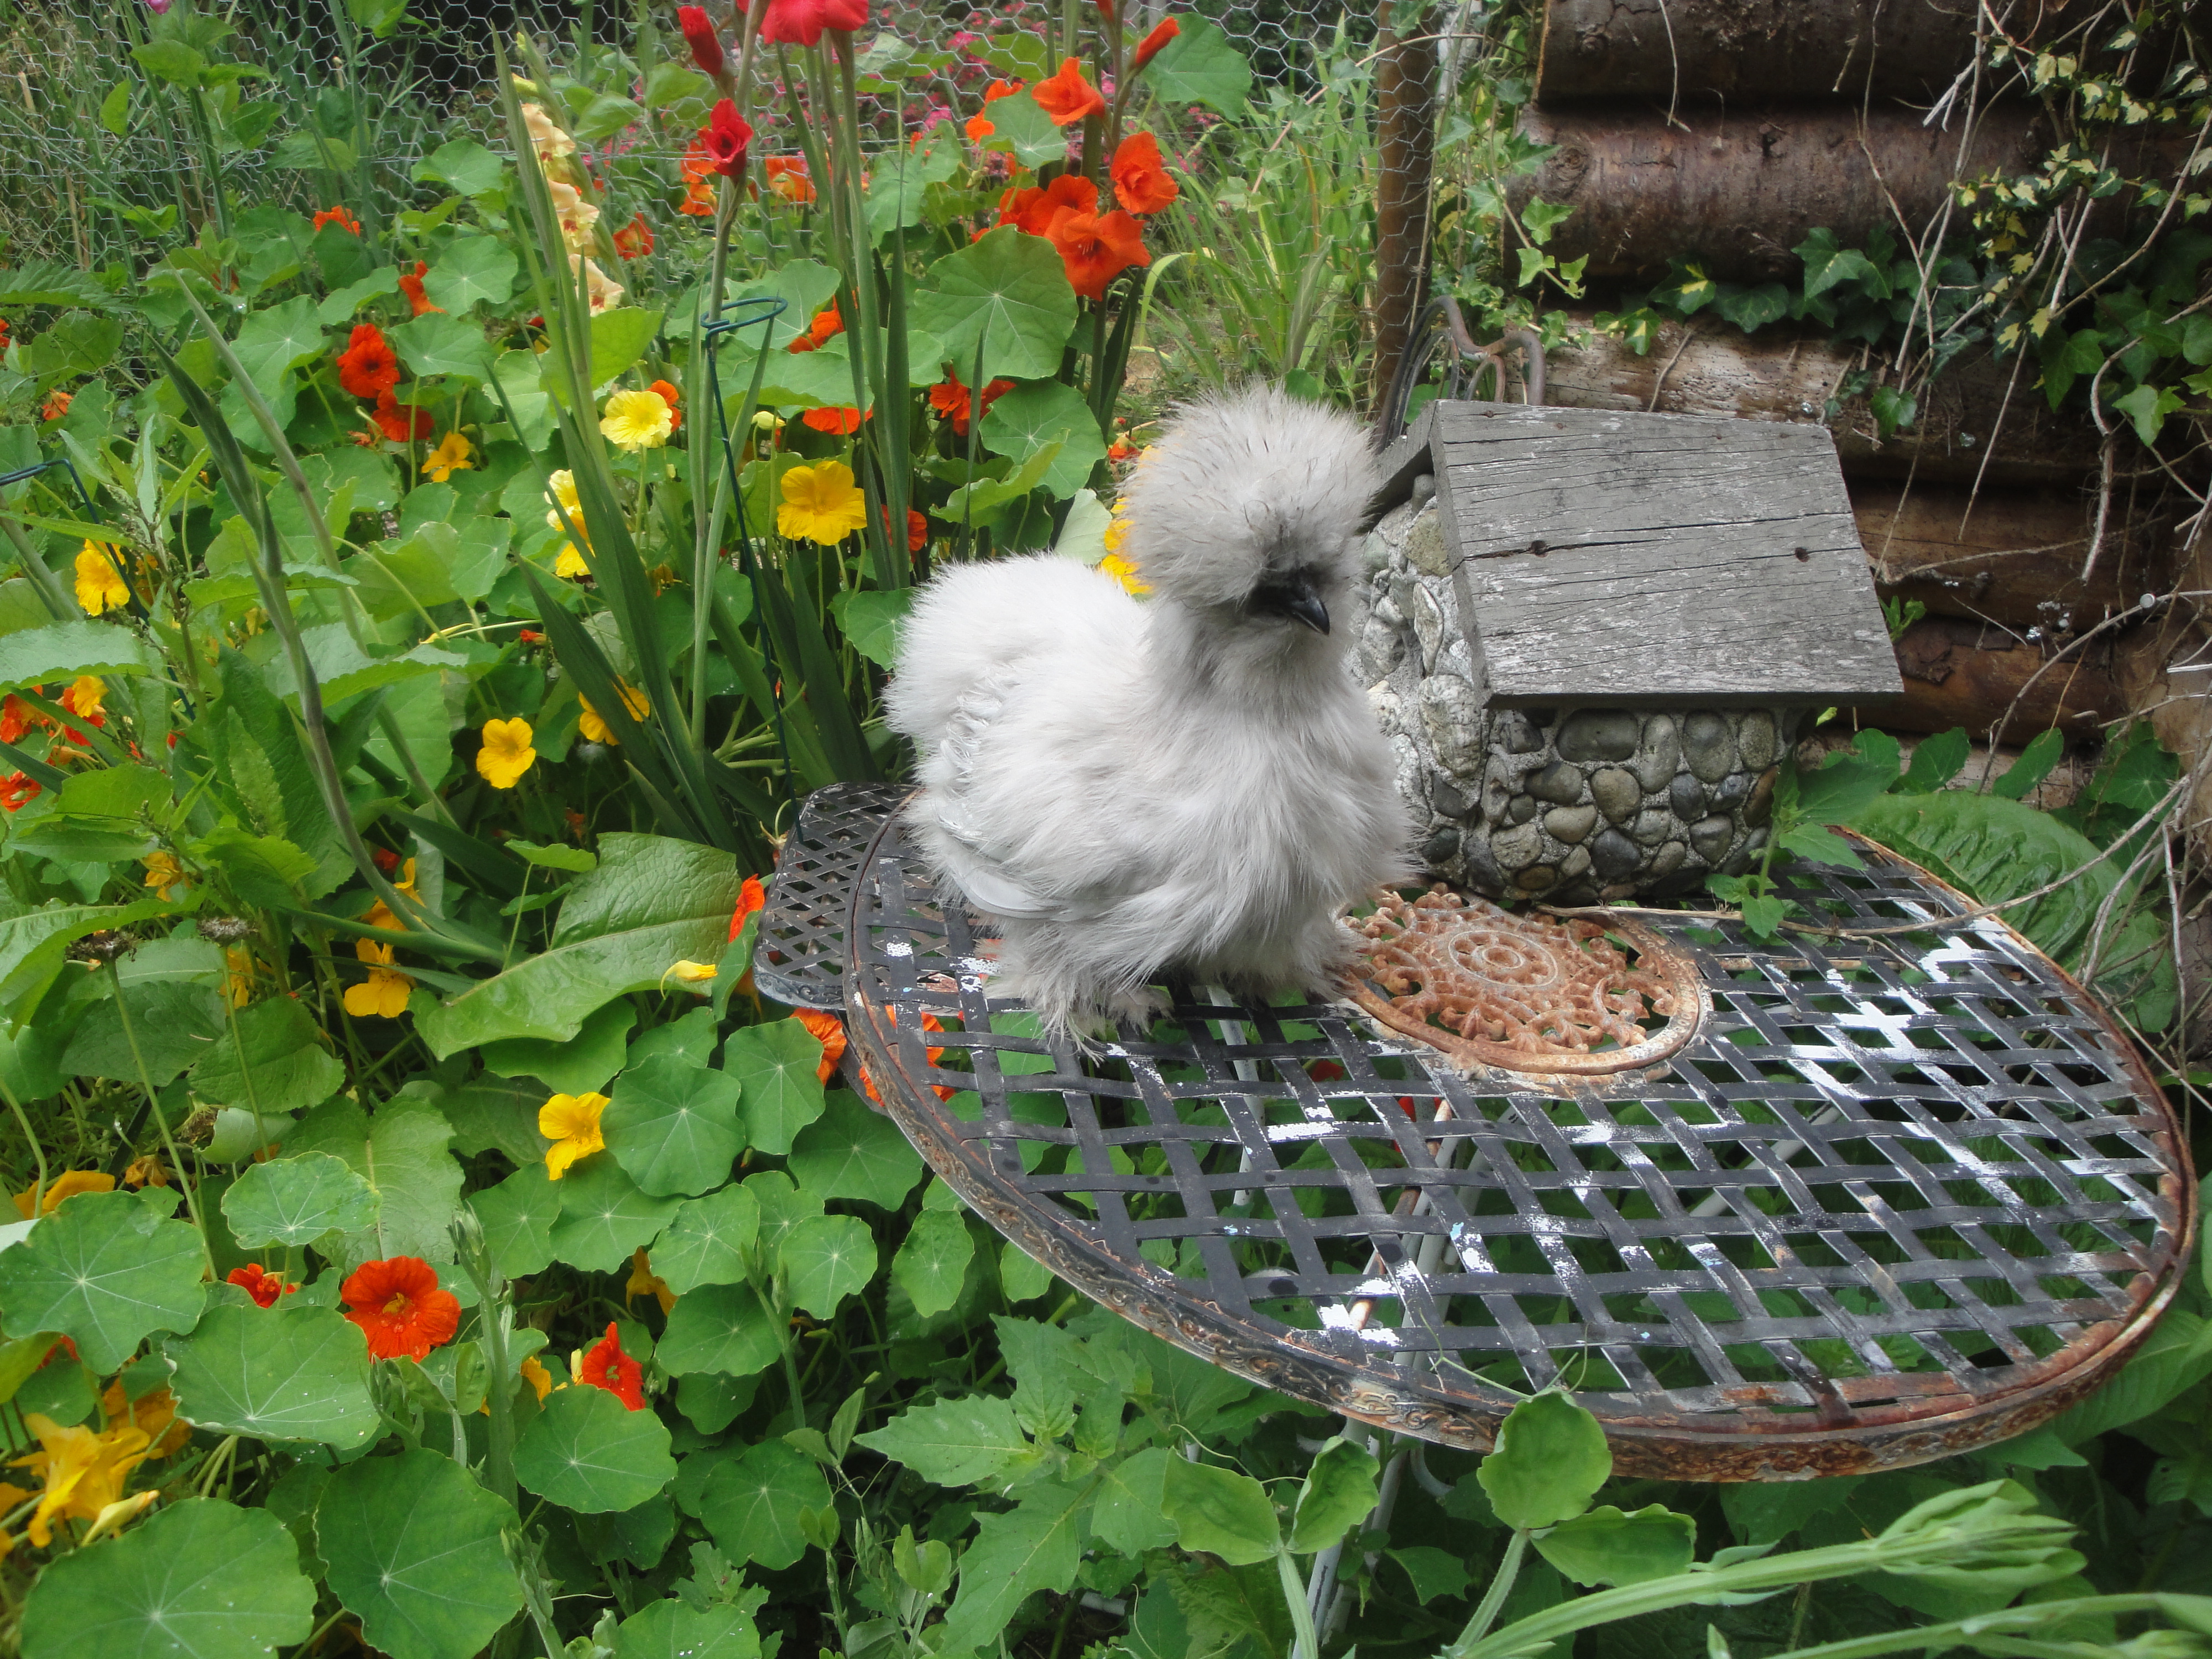 Same little Lavender Catdance pullet. Dosn't want to pose. Four months old July 2013